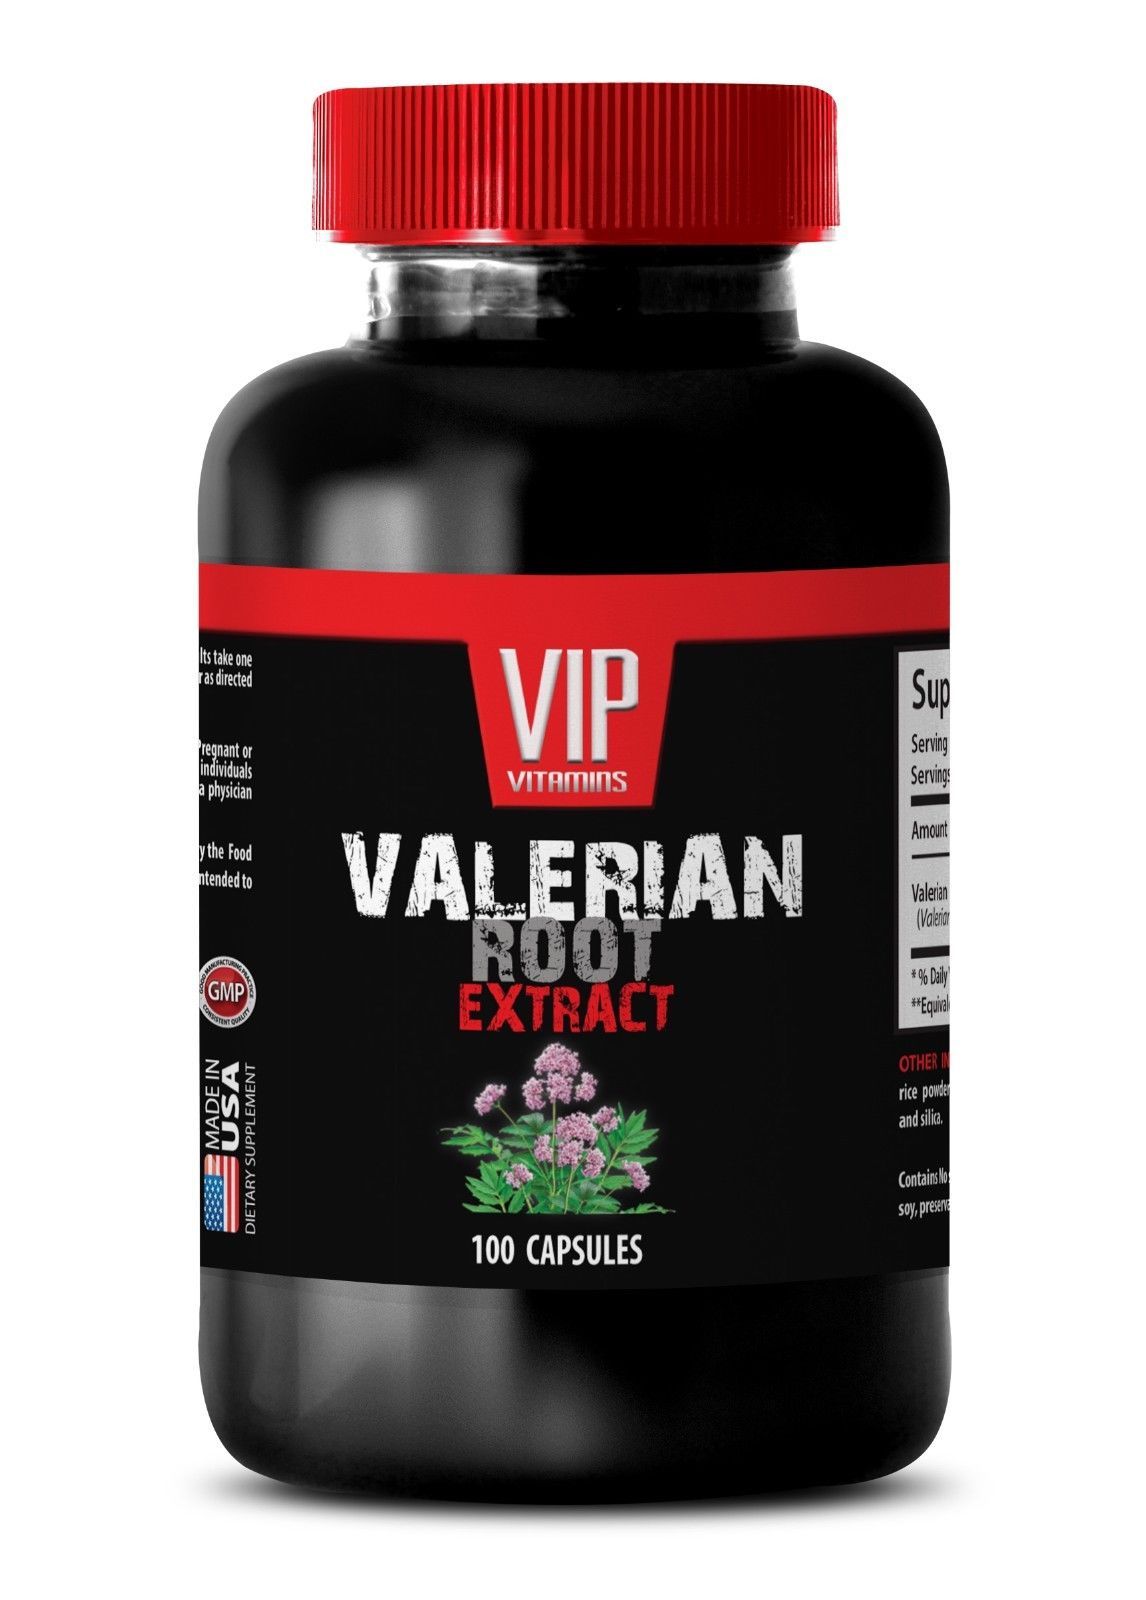 Valerian Extract - VALERIAN ROOT EXTRACT - promote a great night’s rest - 1B - $13.06